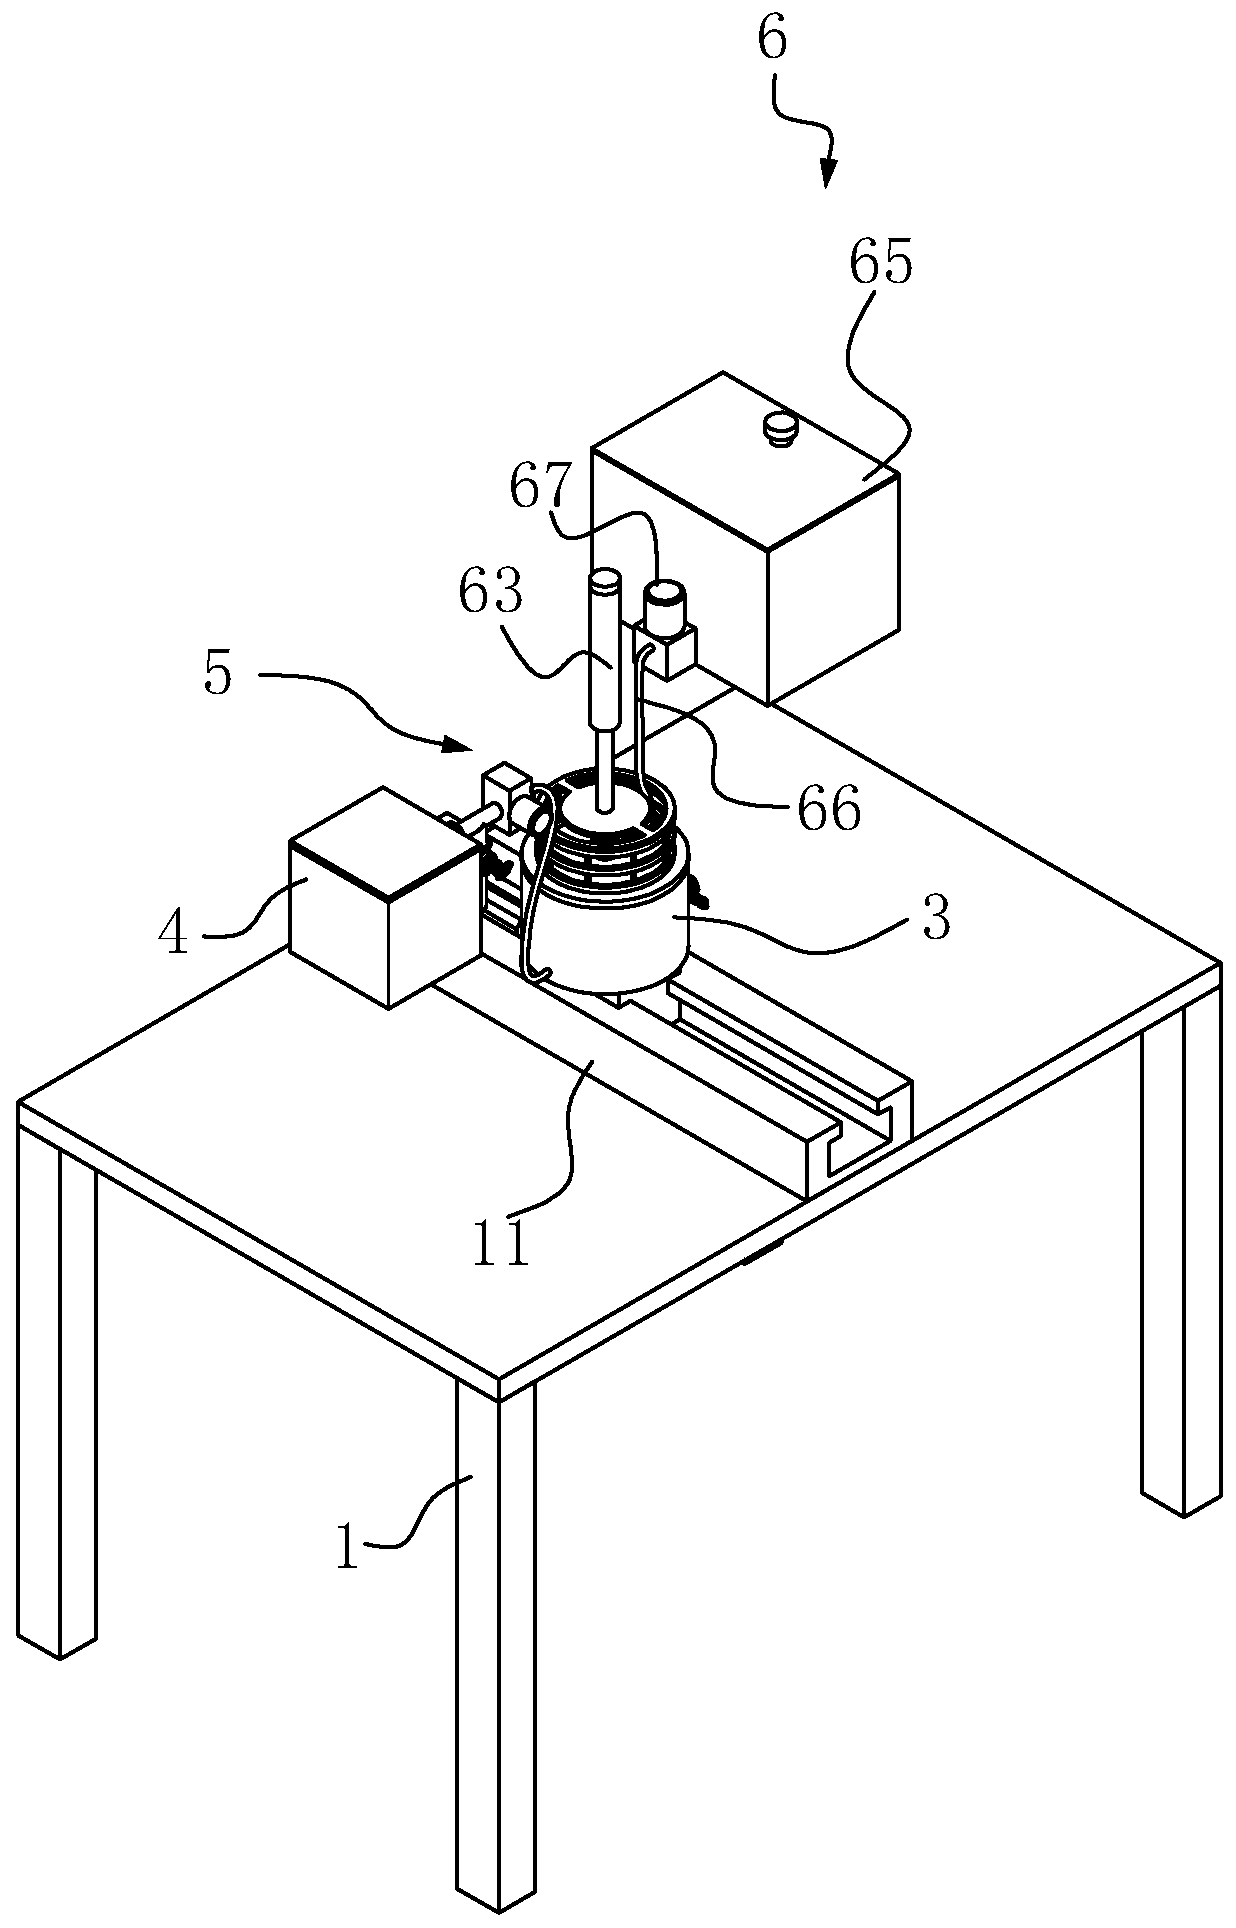 Device for adopting atom absorption spectrophotometry for monitoring water quality